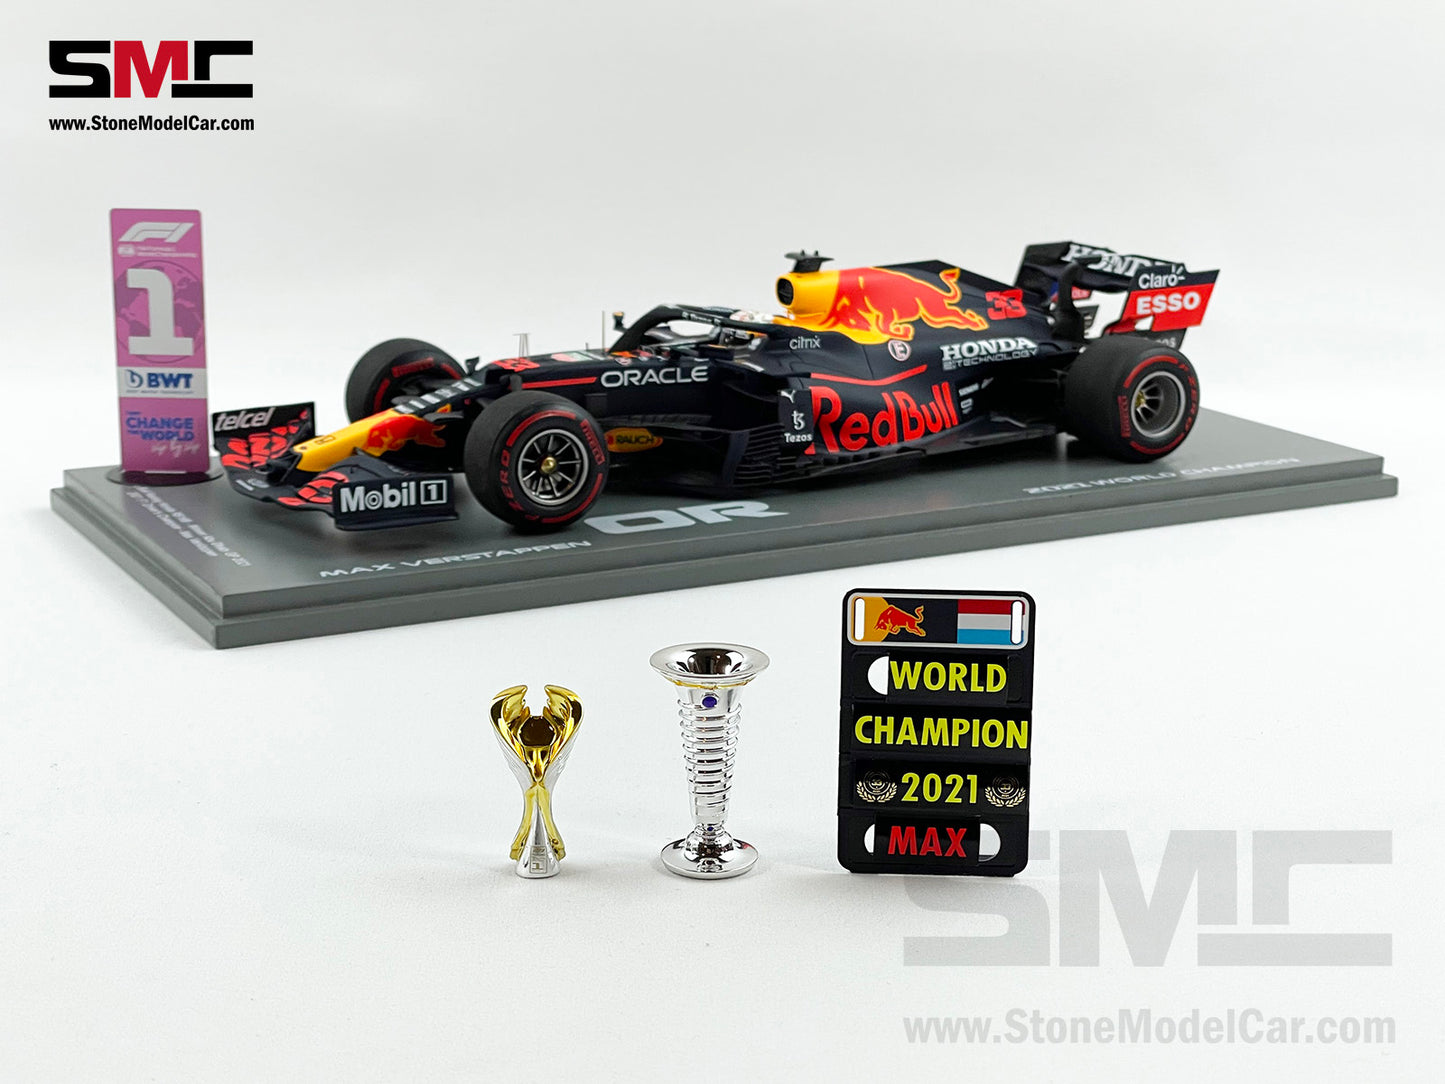 2021 F1 World Champion #33 Max Verstappen Red Bull RB16B Abu Dhabi GP 1:18 Spark with Trophies